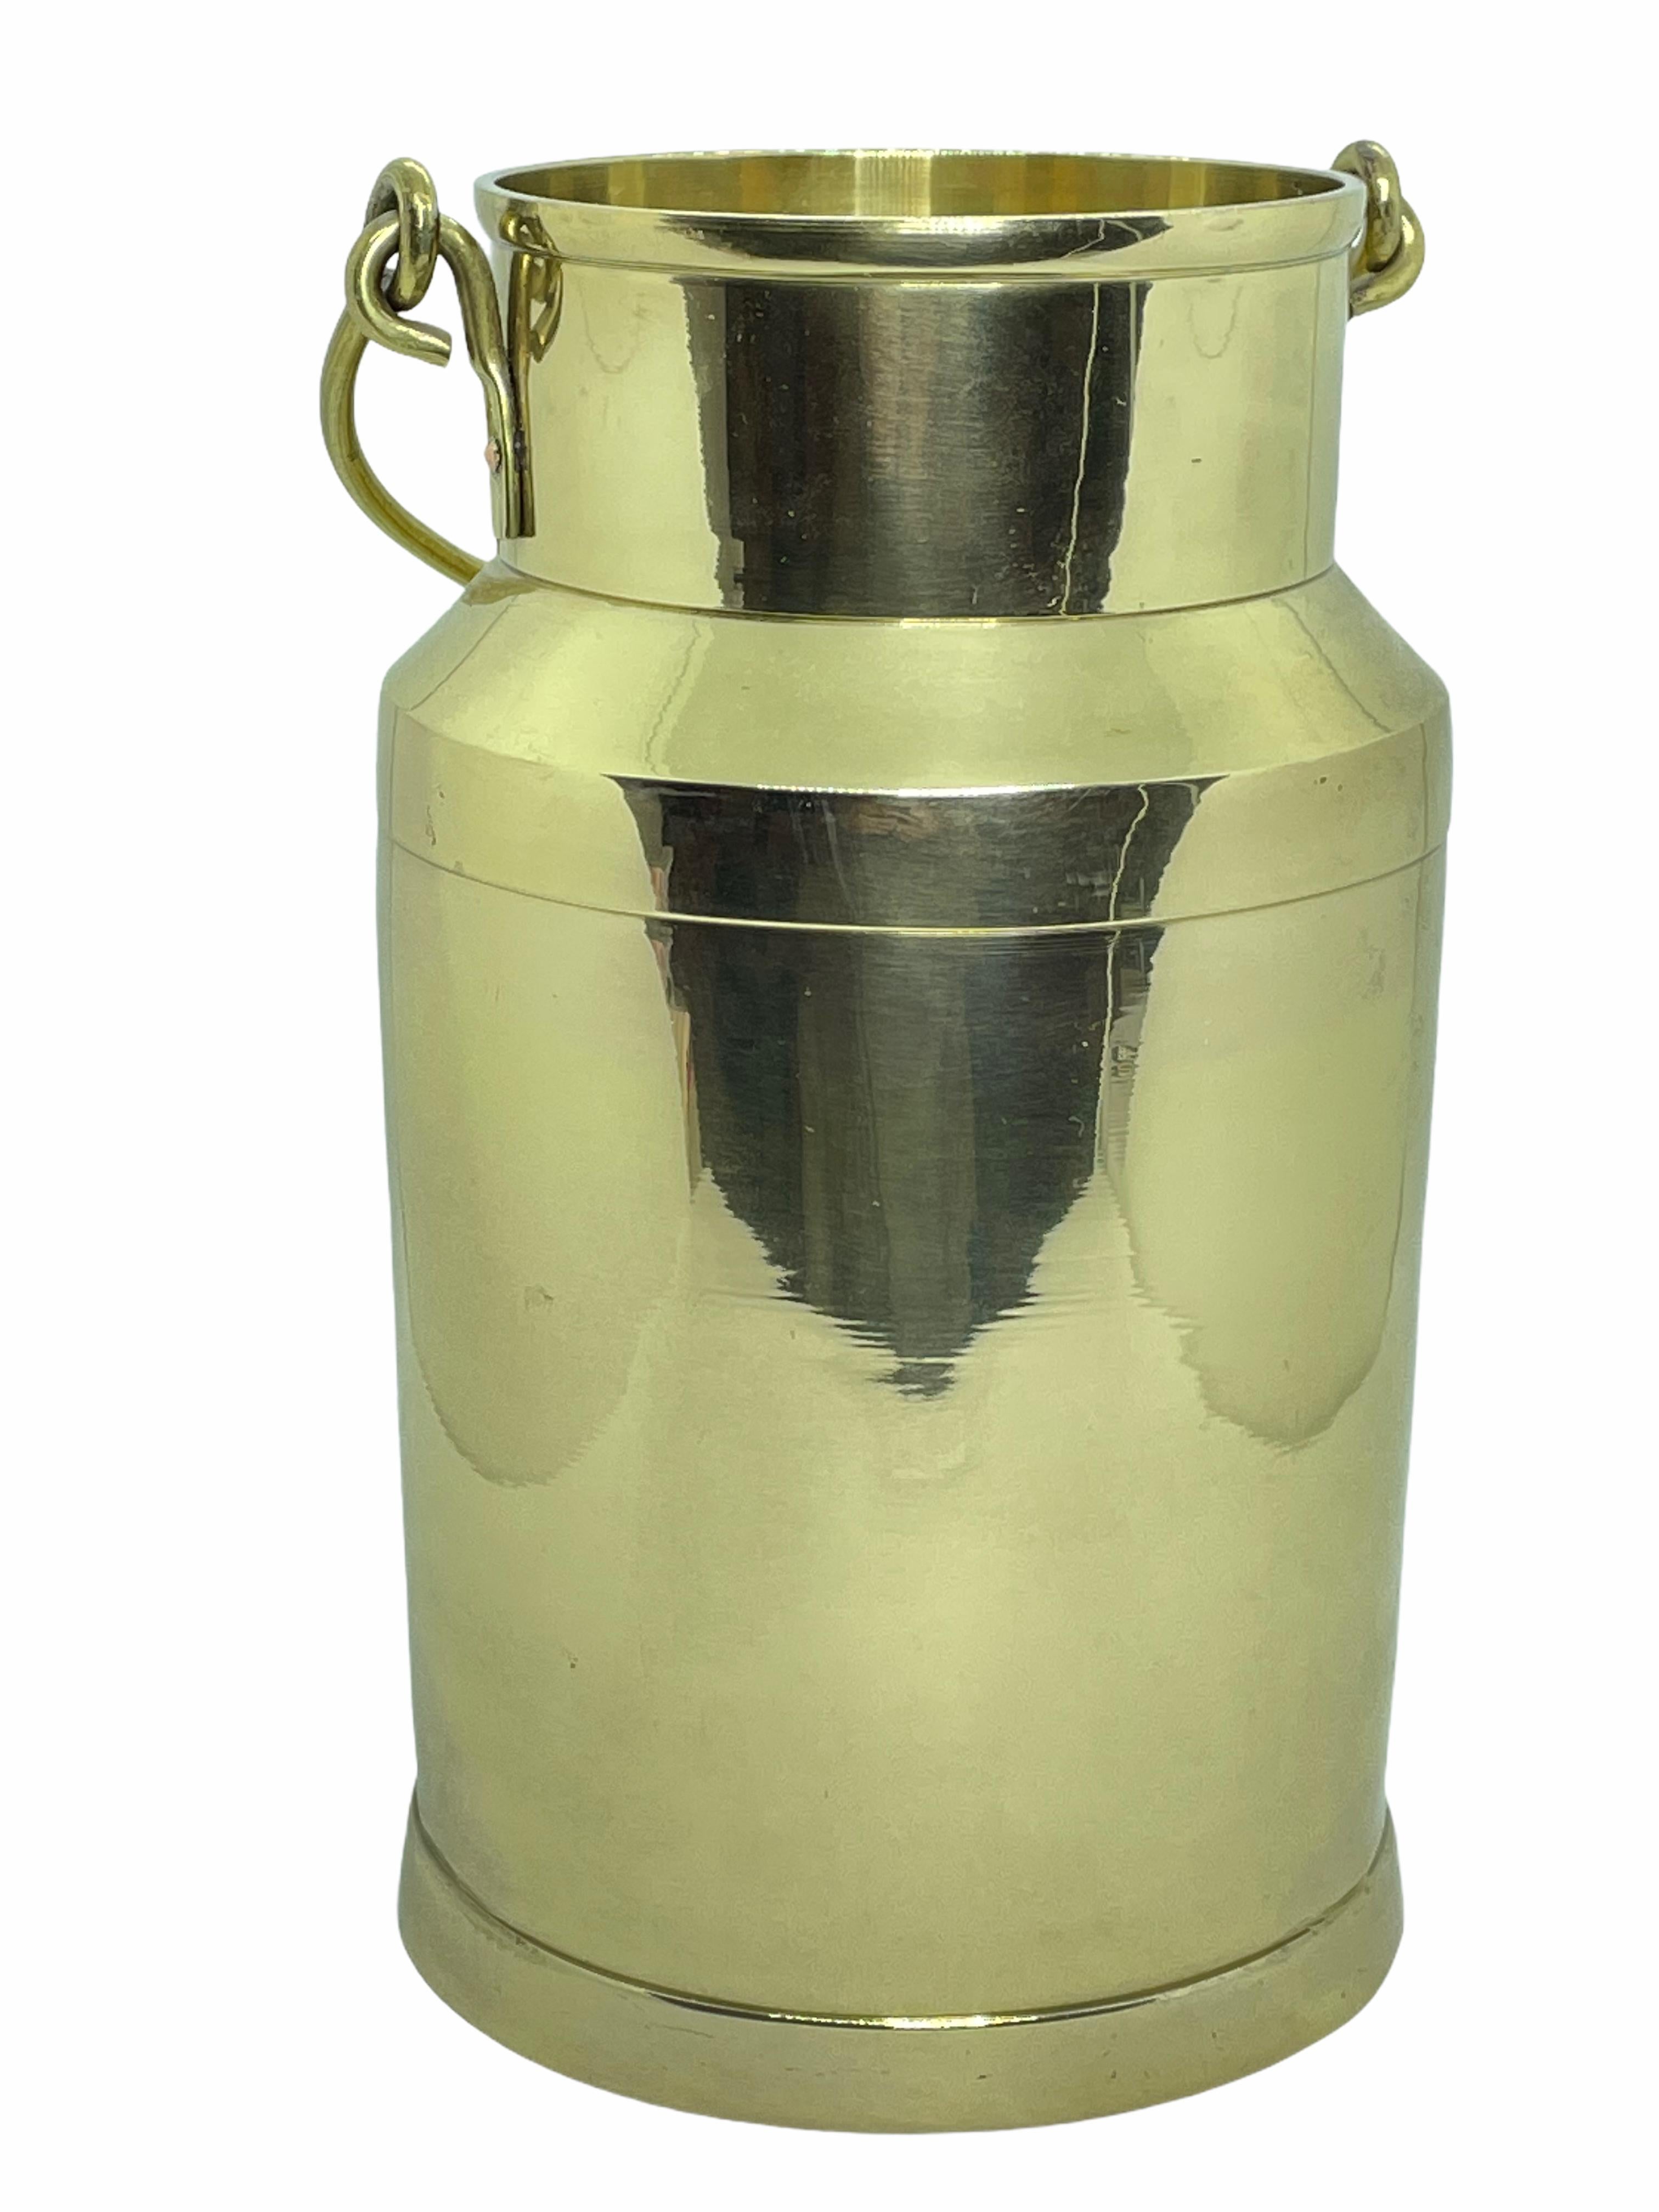 Beautiful polished brass vase. In the shape of a milk can. A beautiful piece for any room. Diameter on top is approx. 3.38